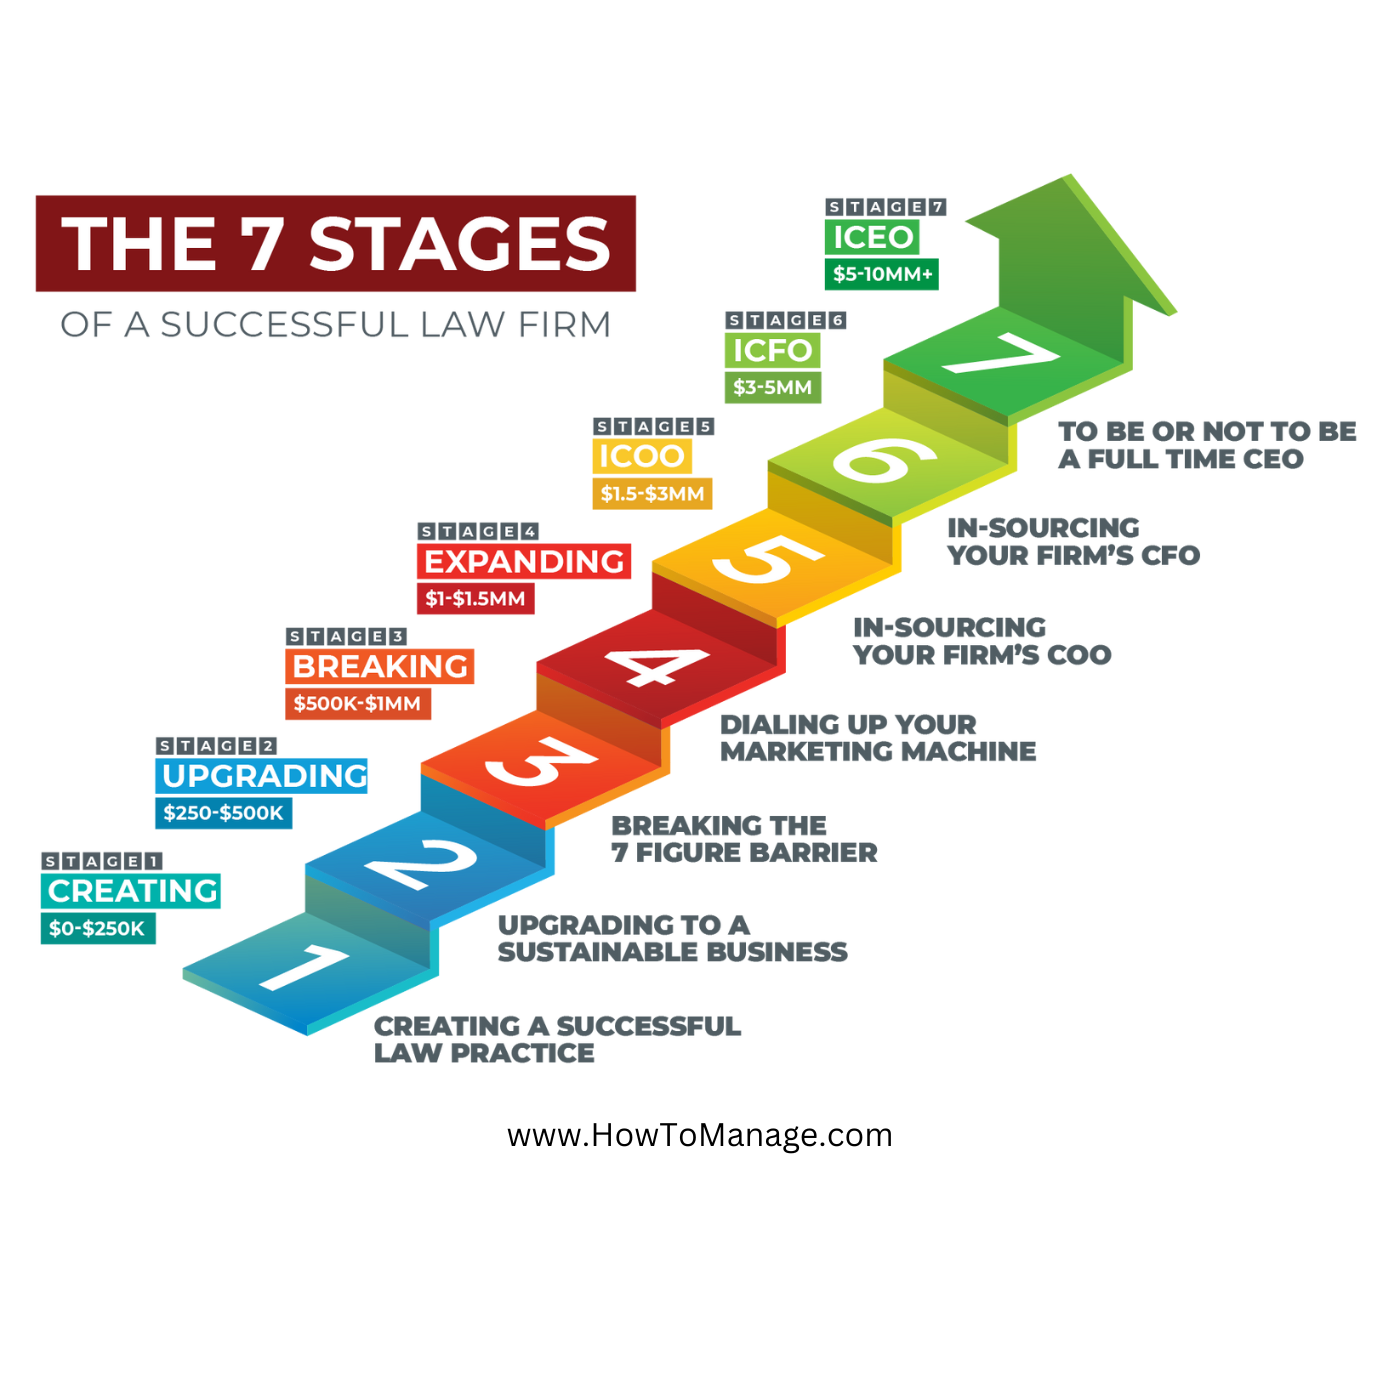 The 7 Stages of A Successful Law Firm Growth Image